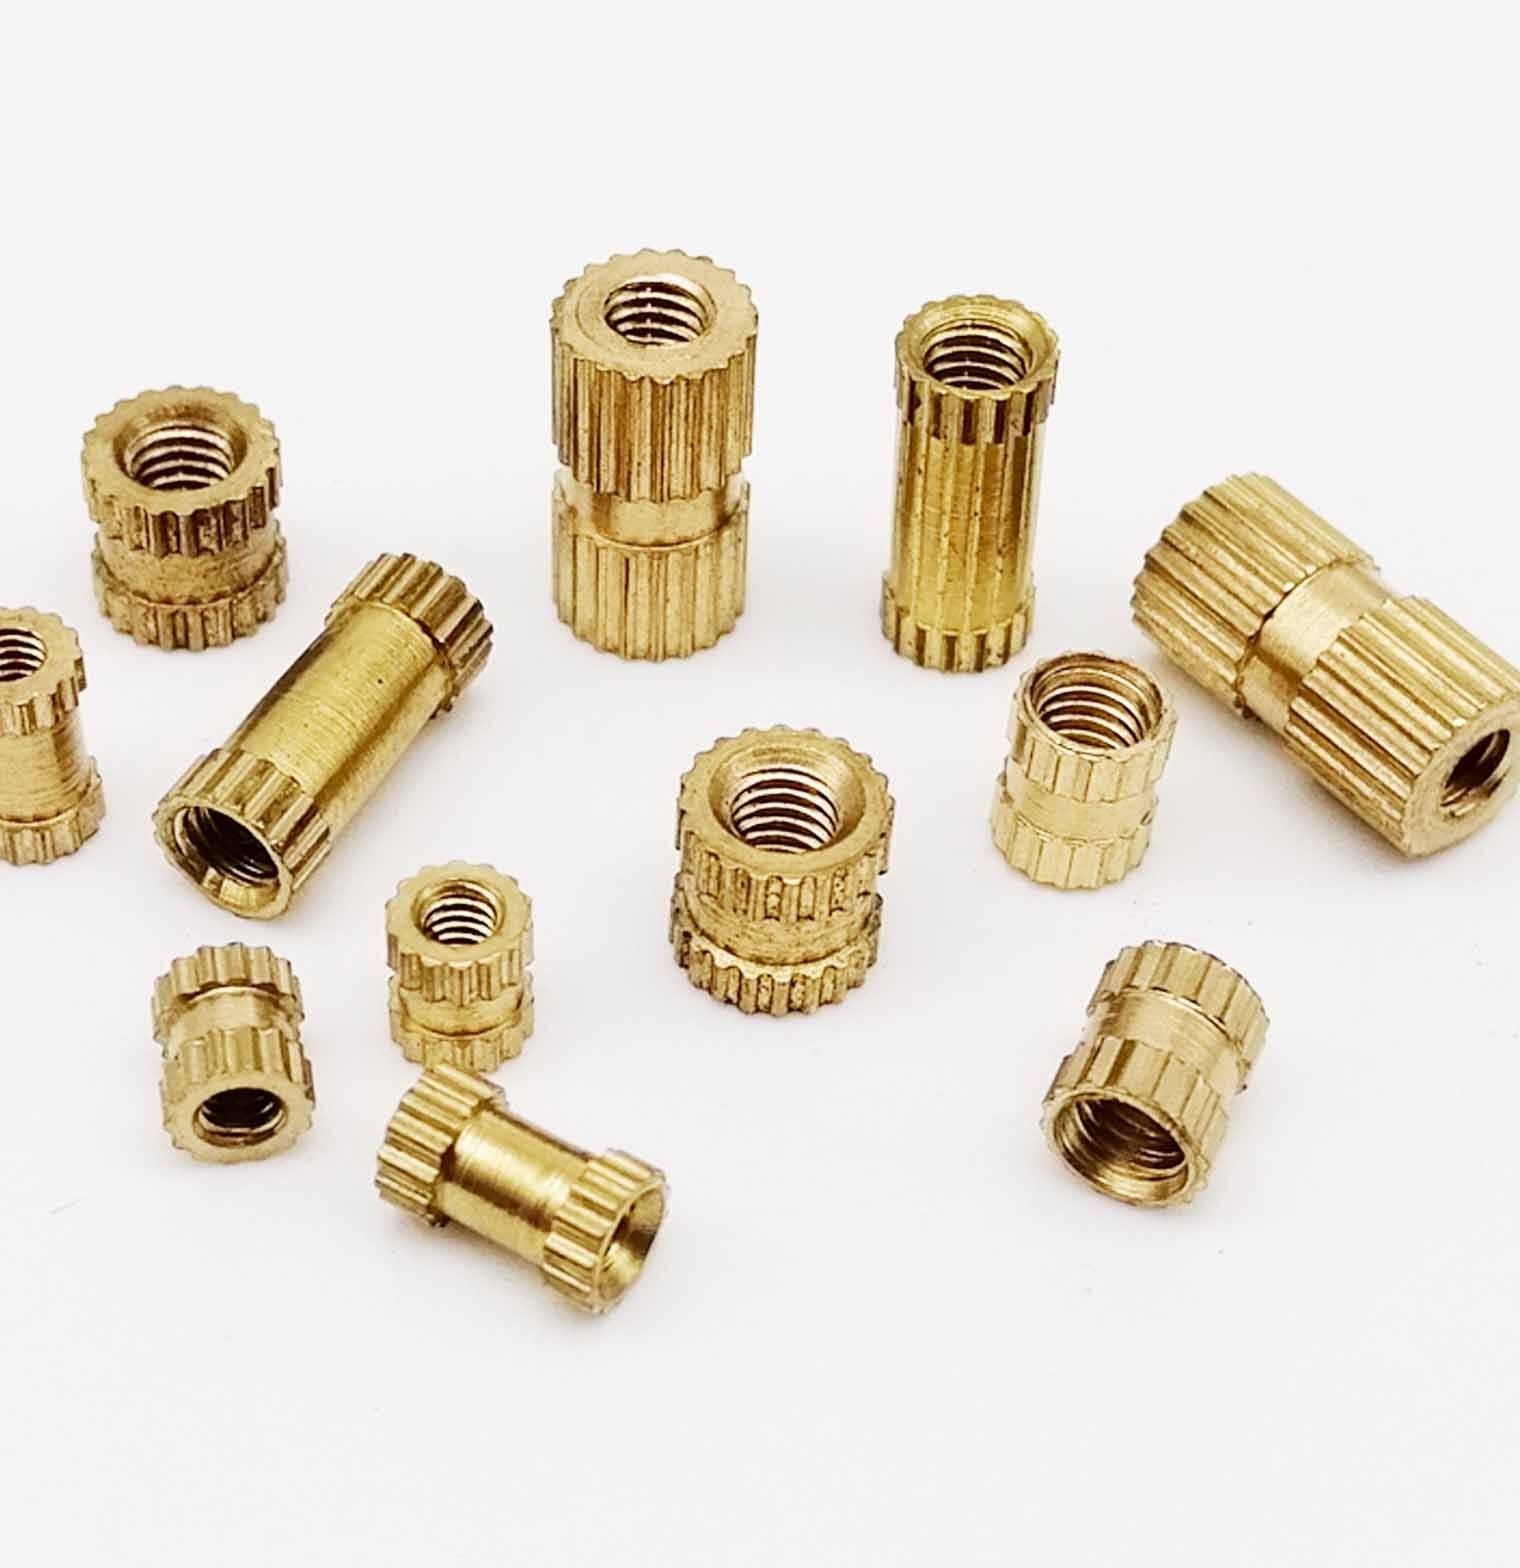 25X M2 M2 5 M3 Solid Brass Pure Copper Metric Thread Injection font b Molding b